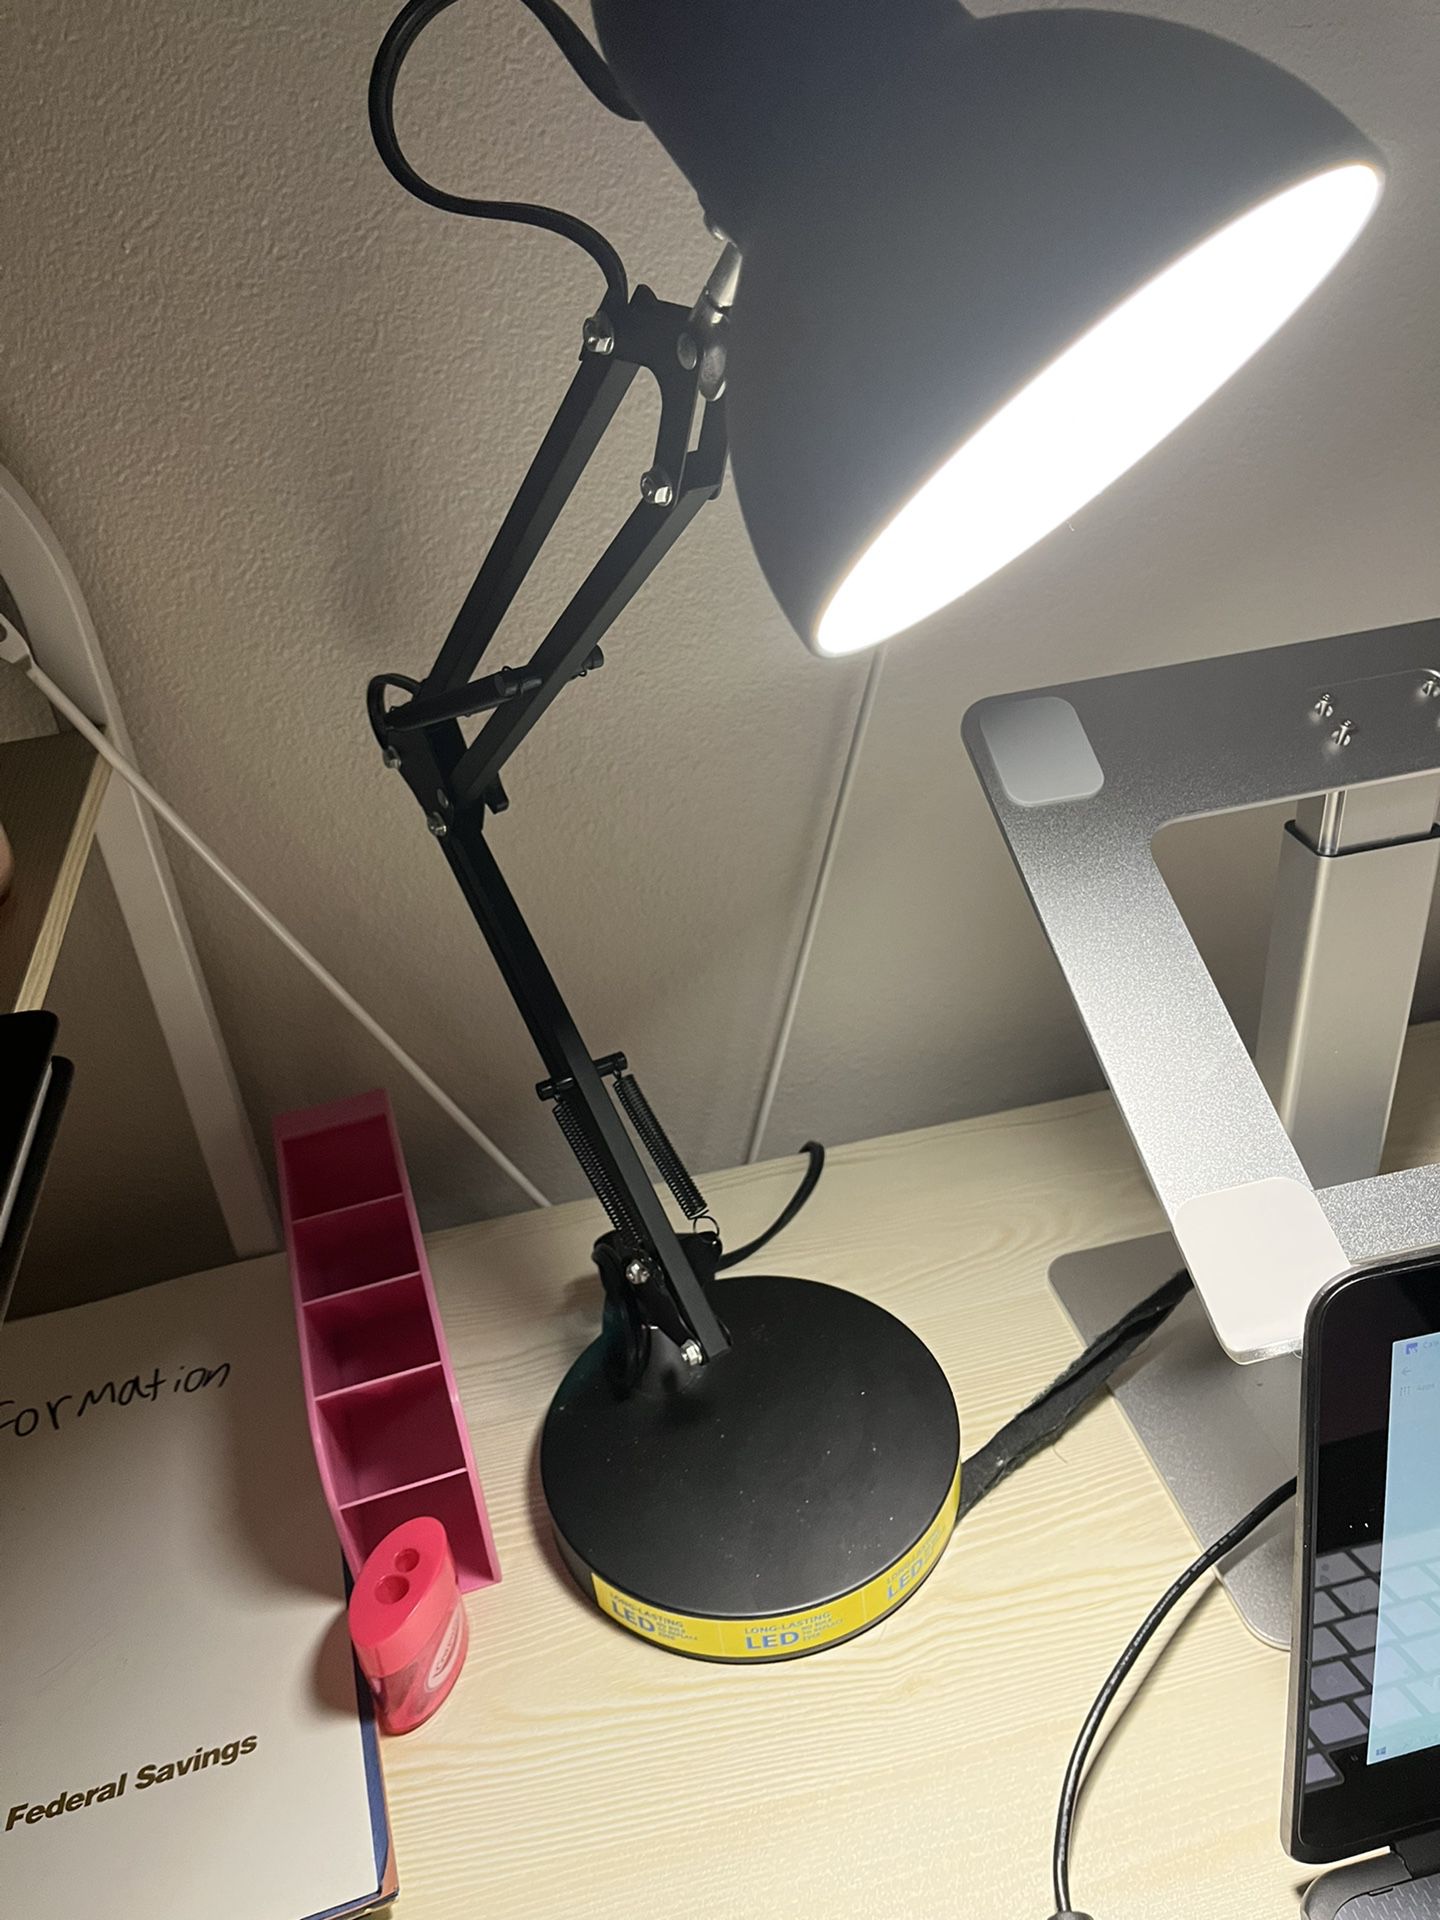 LED Desk Lamp With Flexible Arm